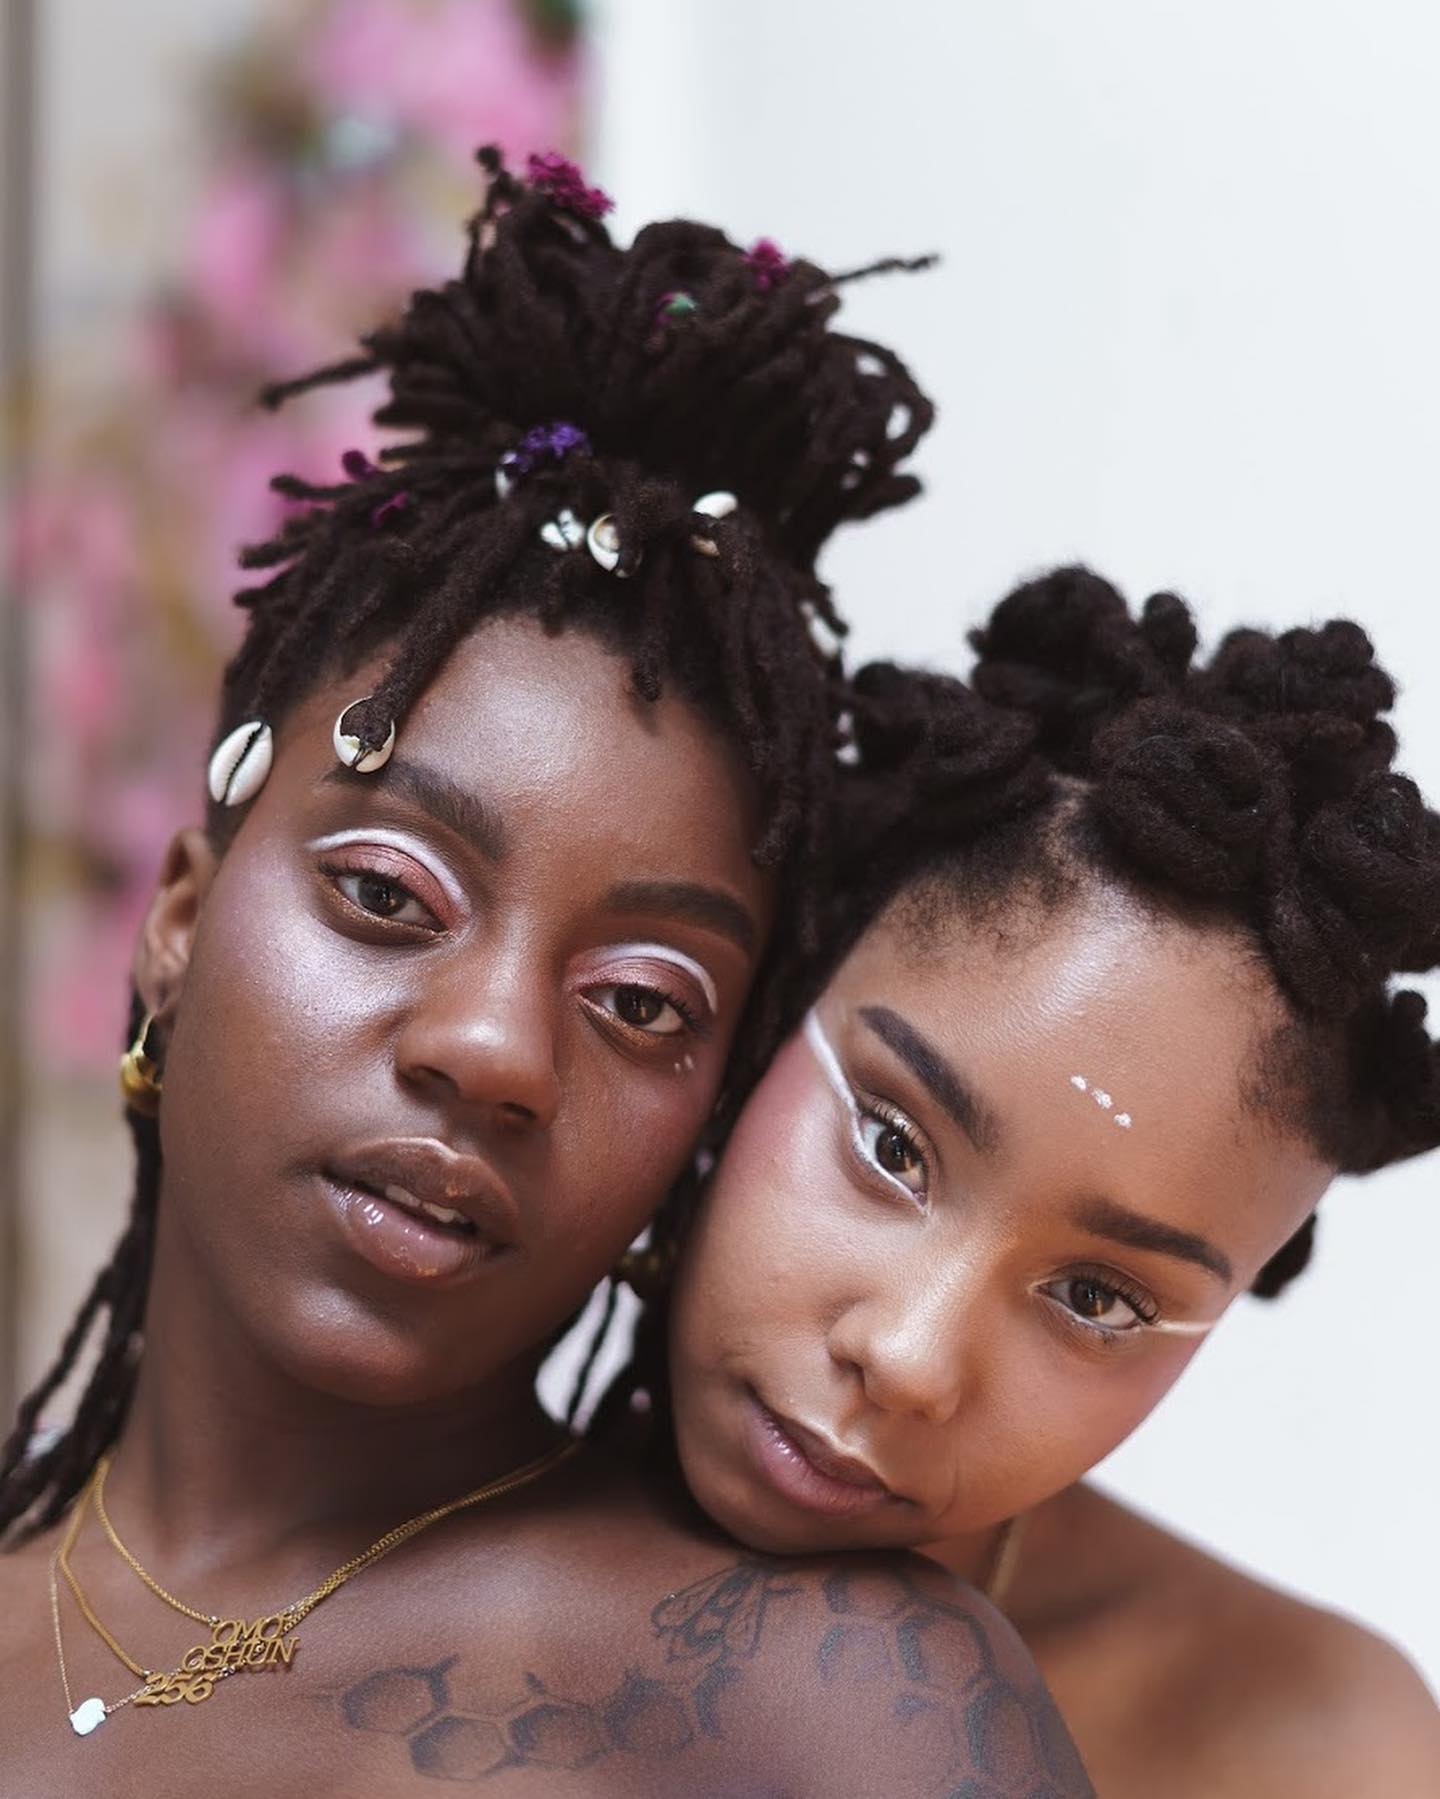 OSHUN collaborates with Red hot org on kele-le